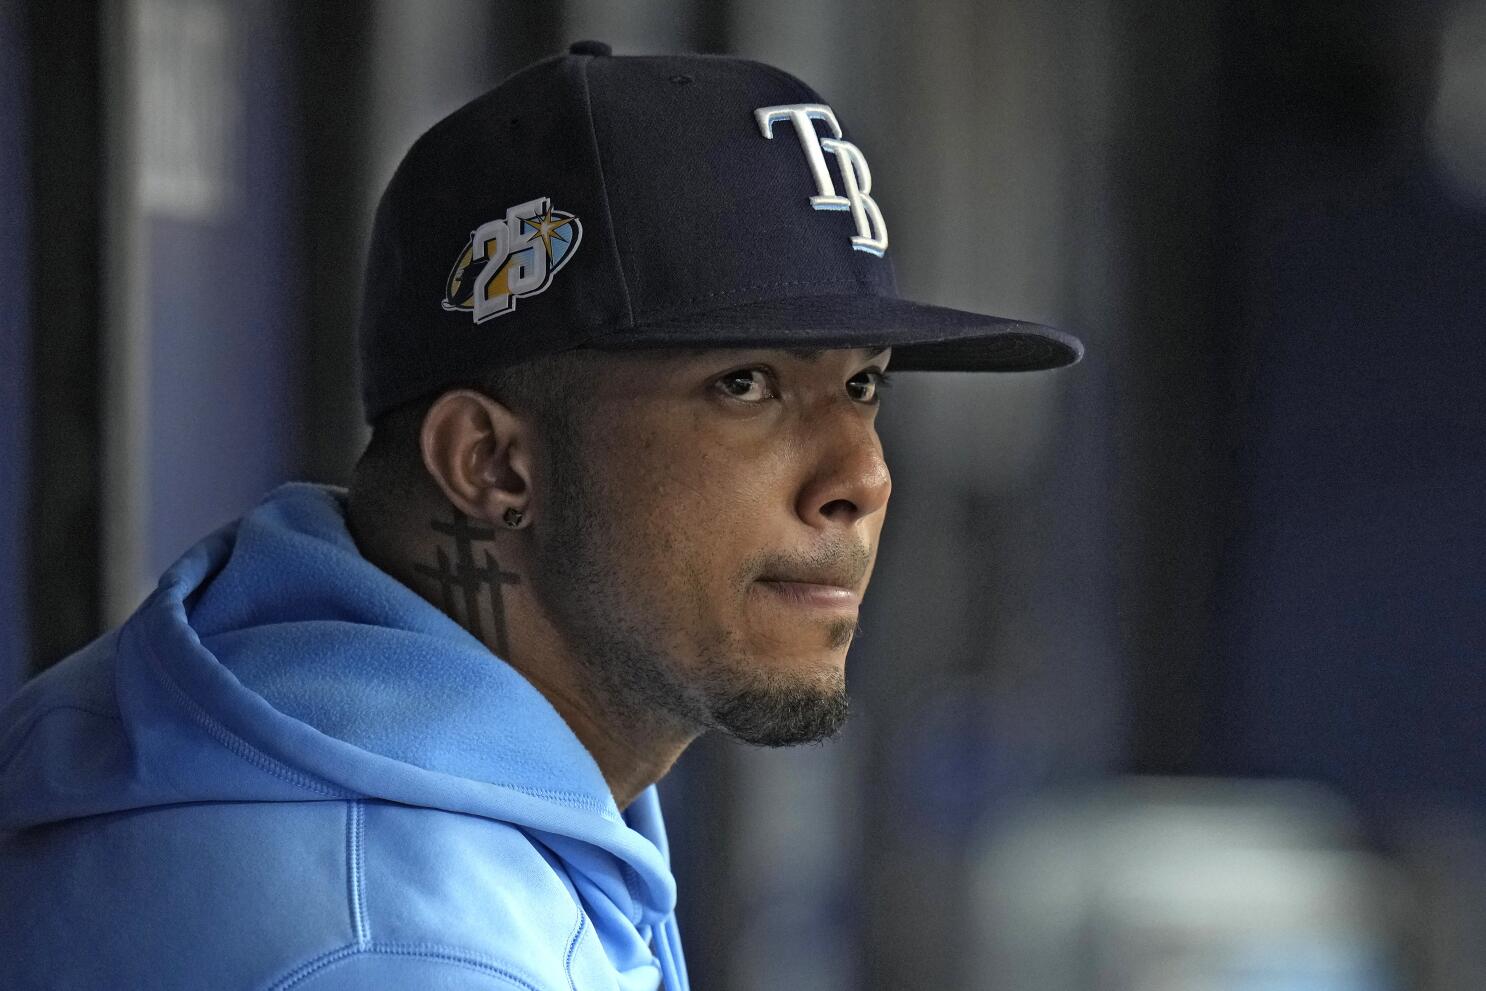 Why has Wander Franco been placed on the Restricted List? Social media  posts against Rays star being investigated